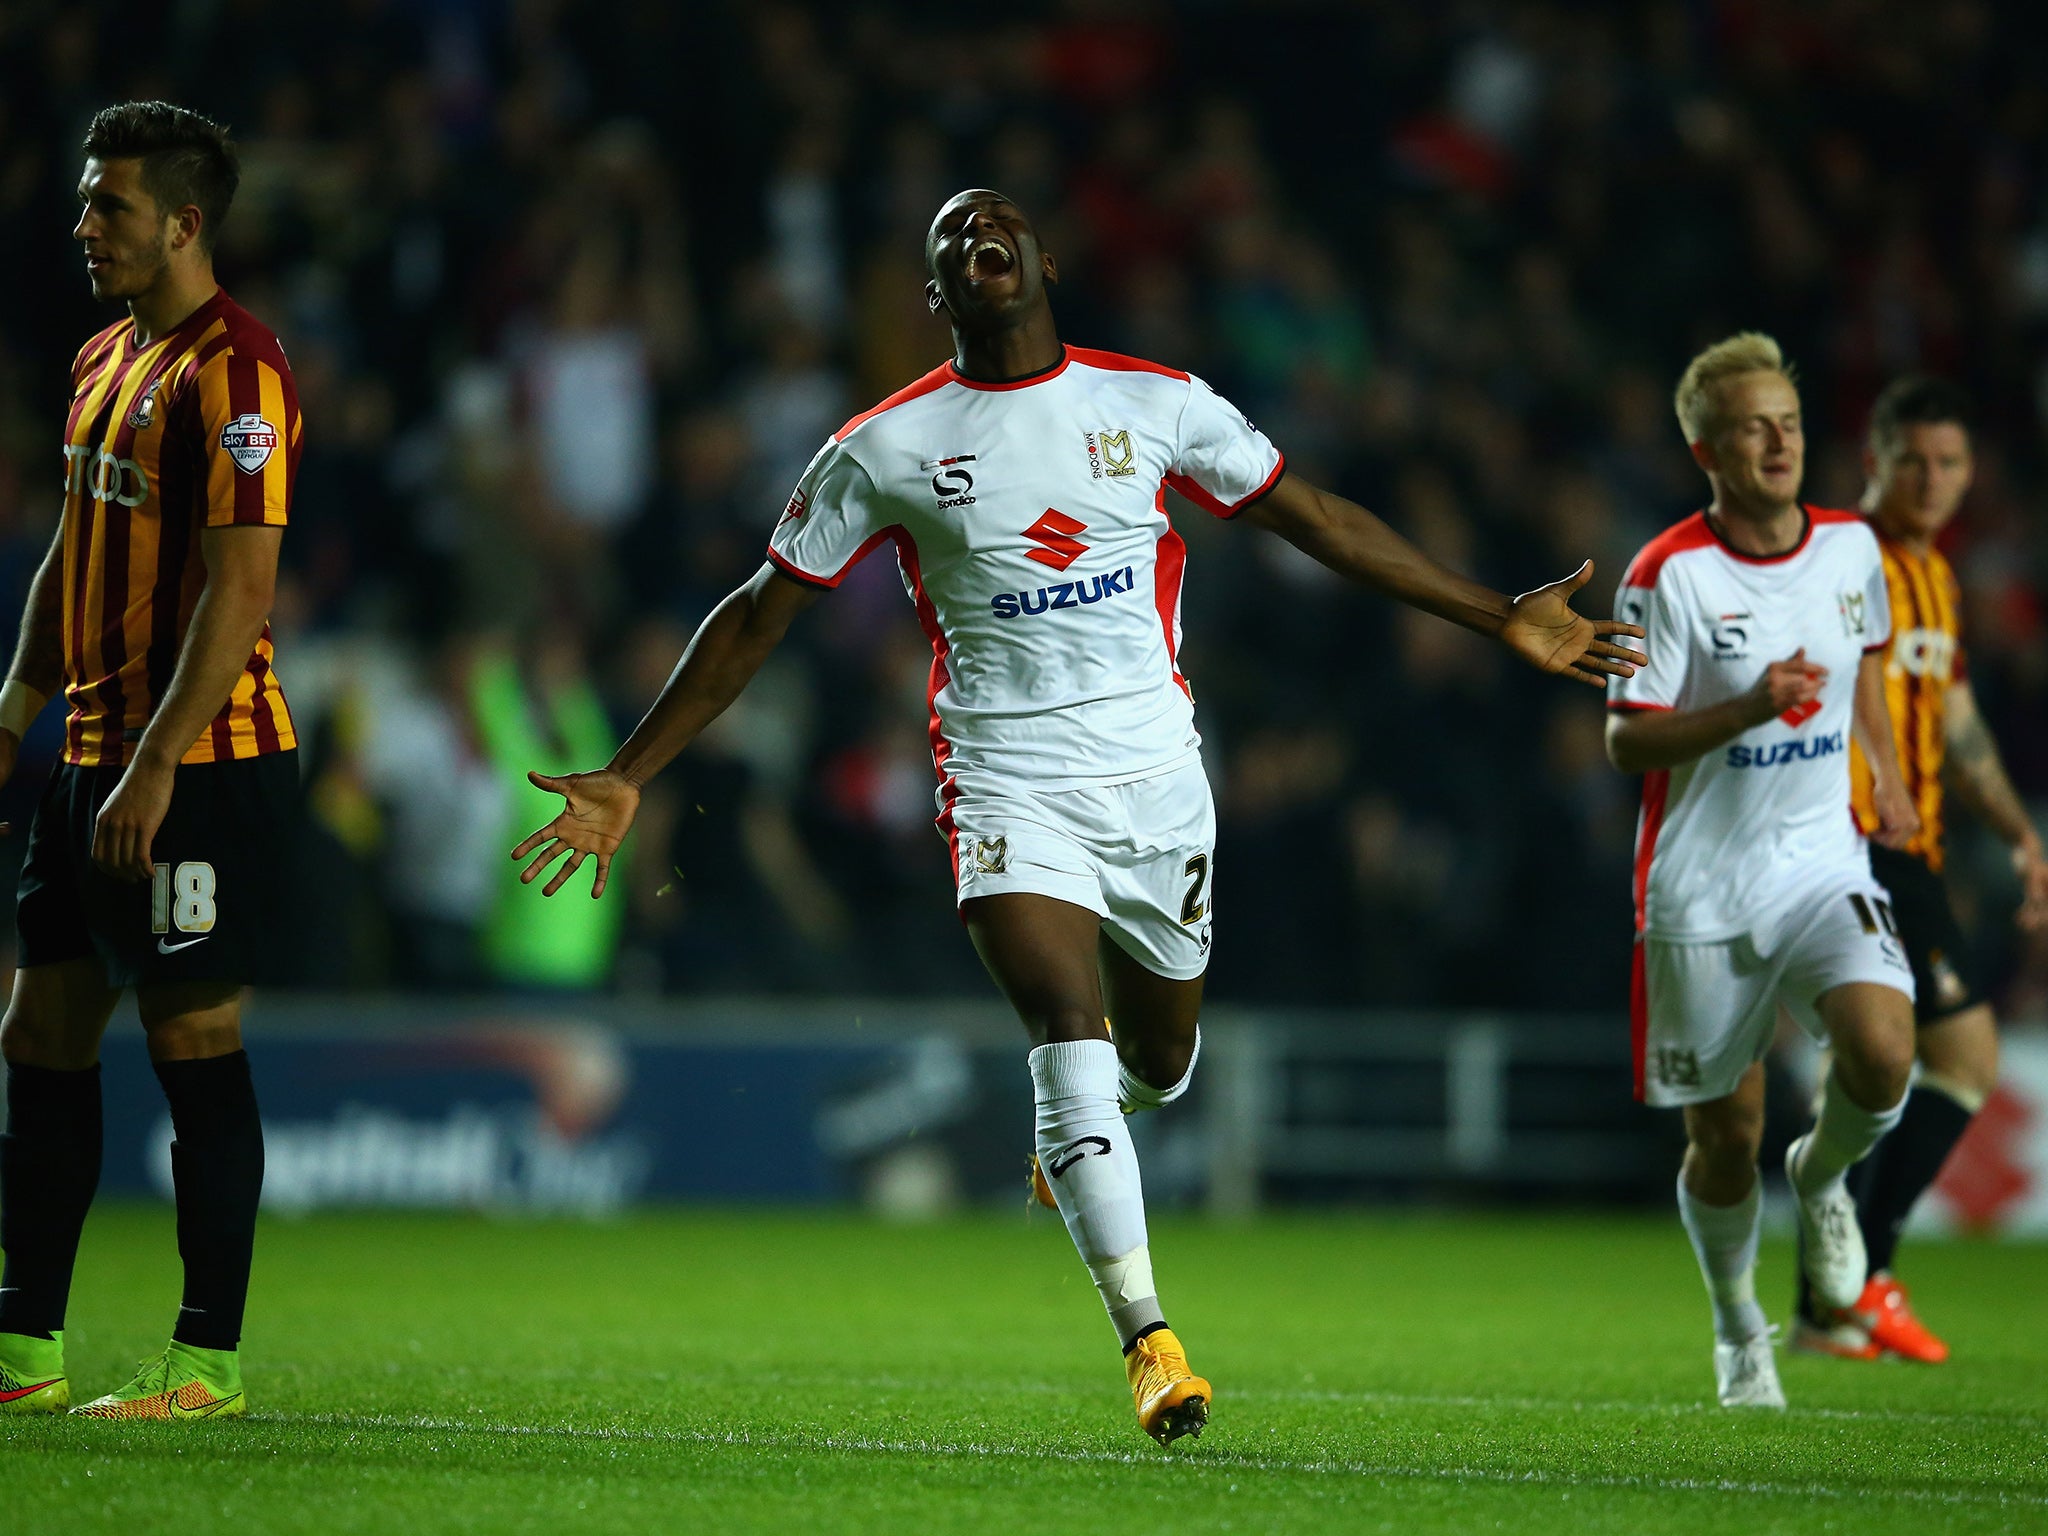 Afobe scored 19 of his goals on loan at MK Dons before making a permanent switch to Wolves in January